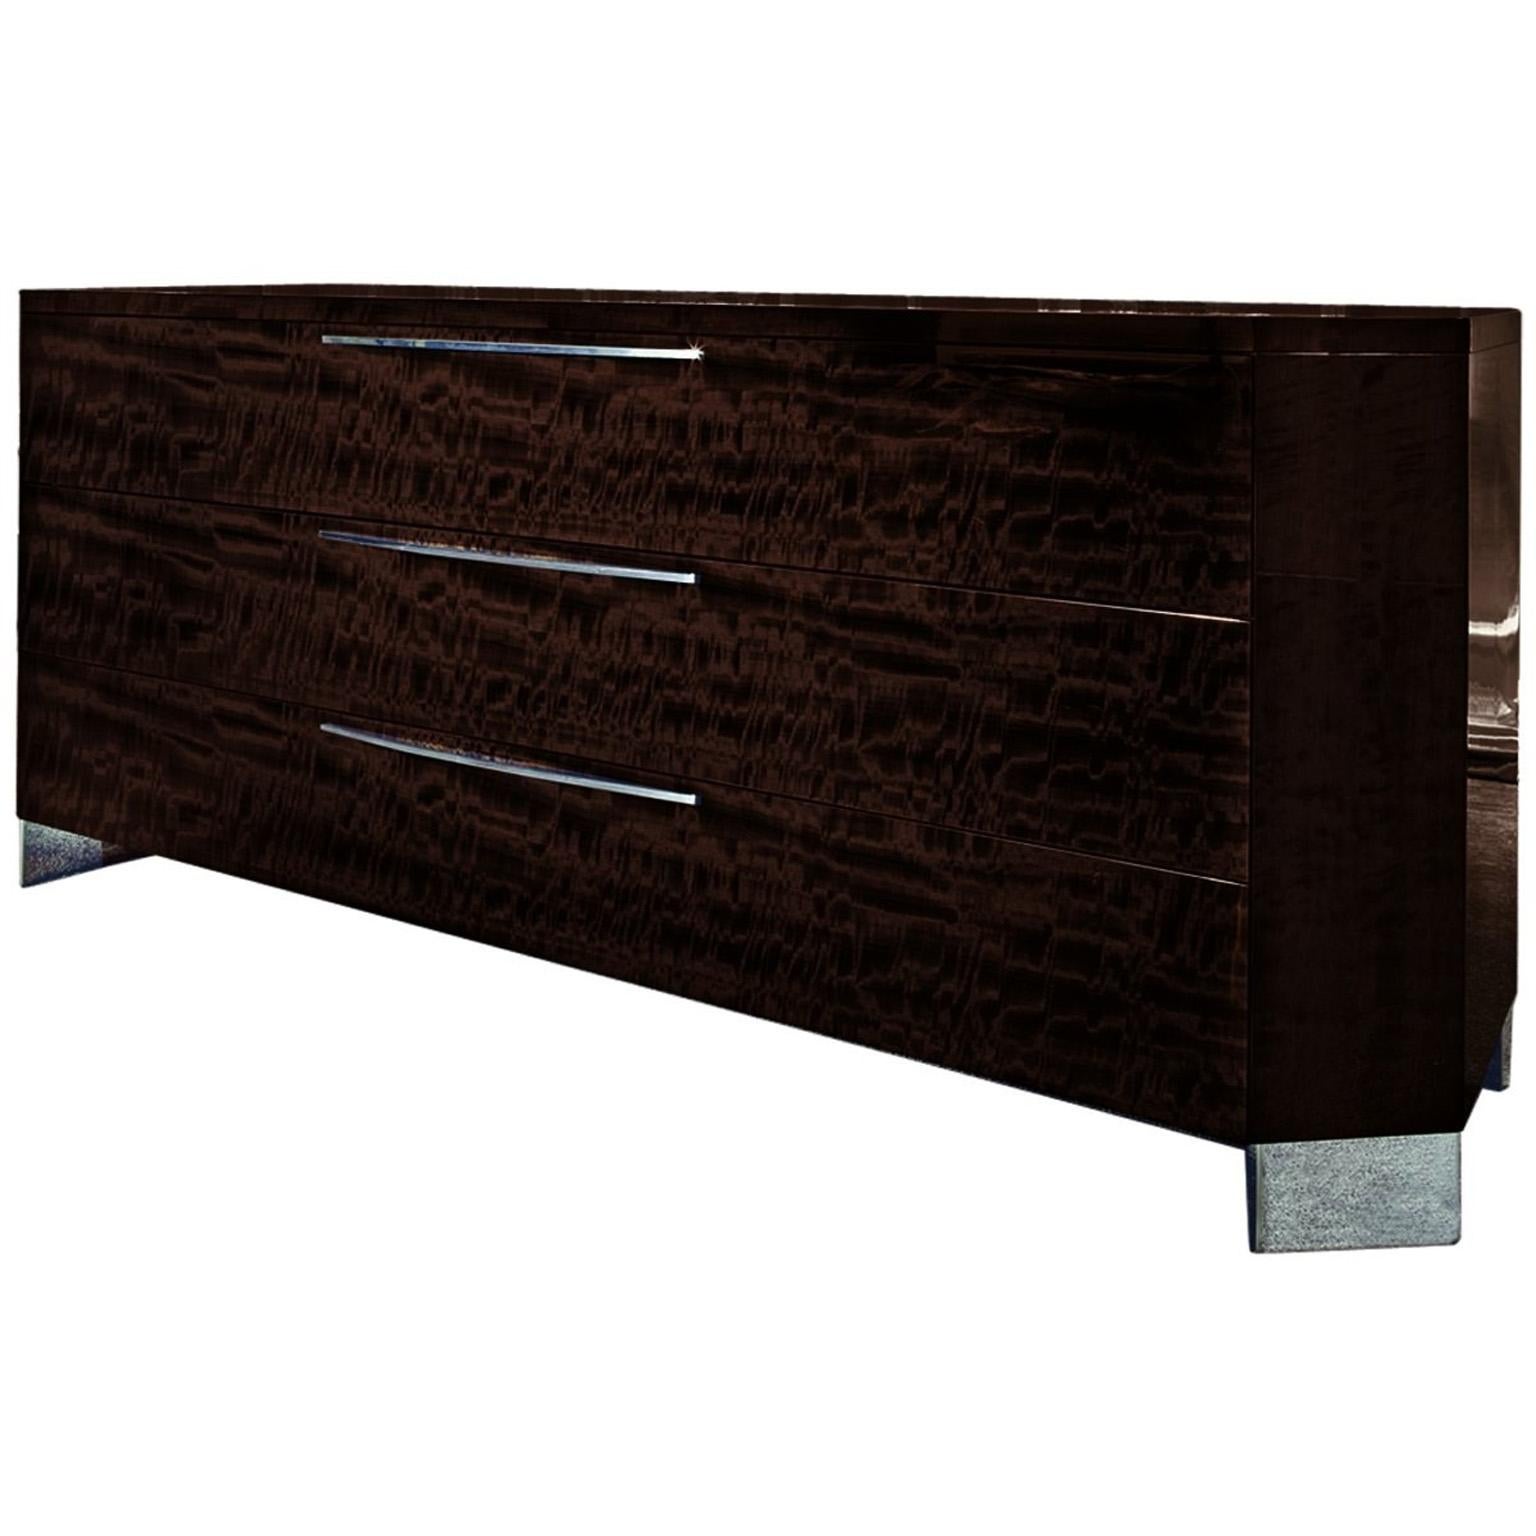 Giorgio Collection Dresser. Three-drawer dresser of European curly eucalyptus veneer in a high-gloss finish, inlay top, and chromed stainless steel hardware and feet. Three drawers are full-extension double drawers.
Accessories pictured on top of